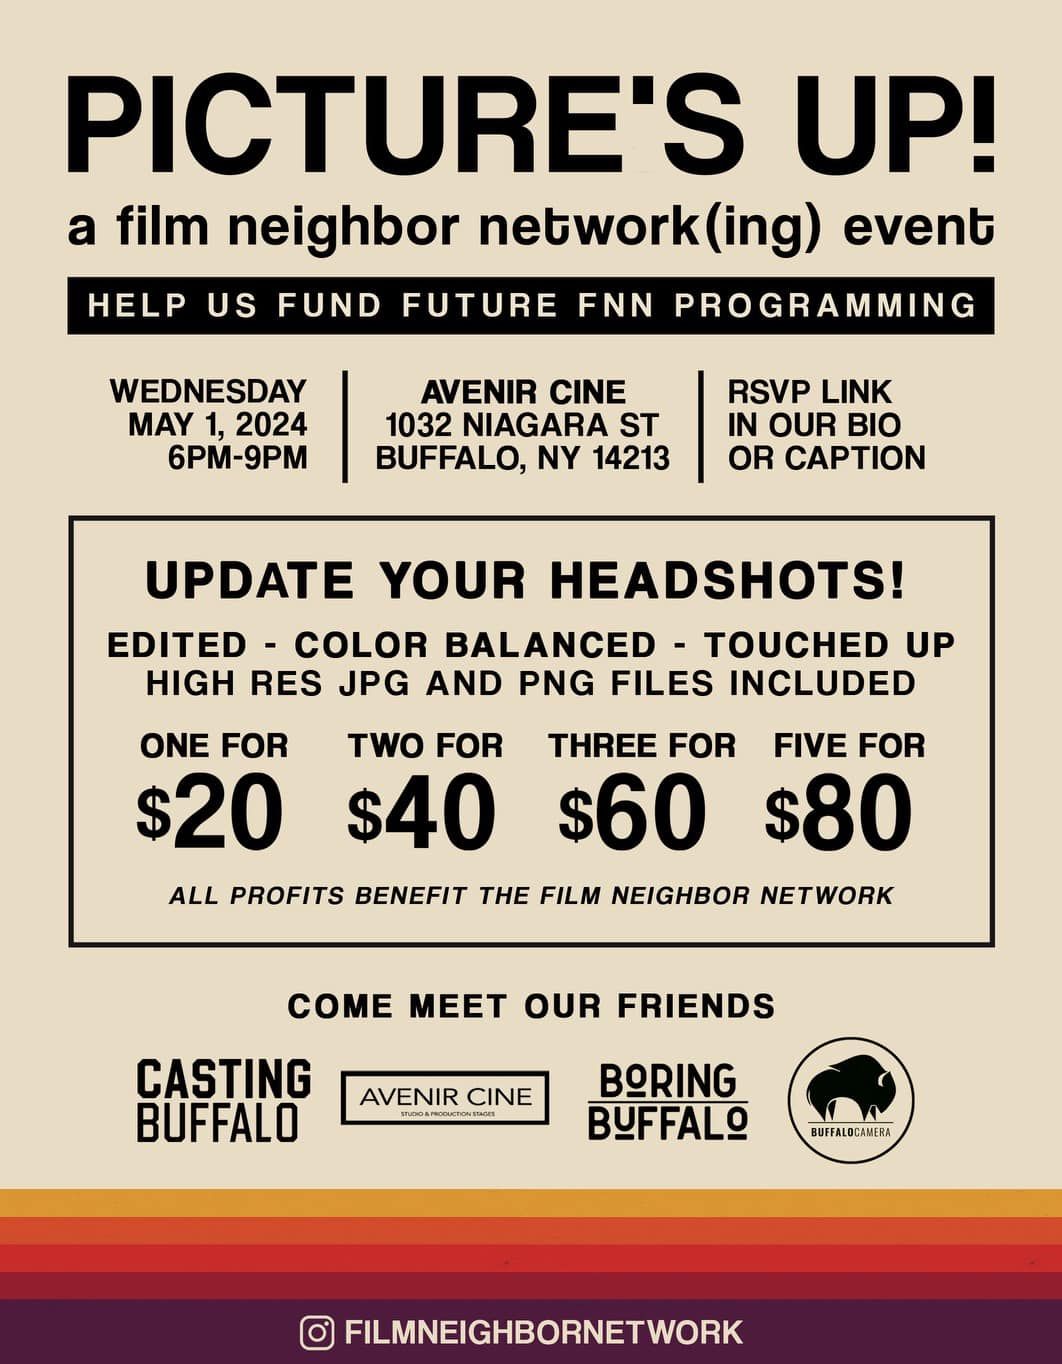 Film Neighbor Network(ing) - PICTURE\u2019S UP! Fundraising Event